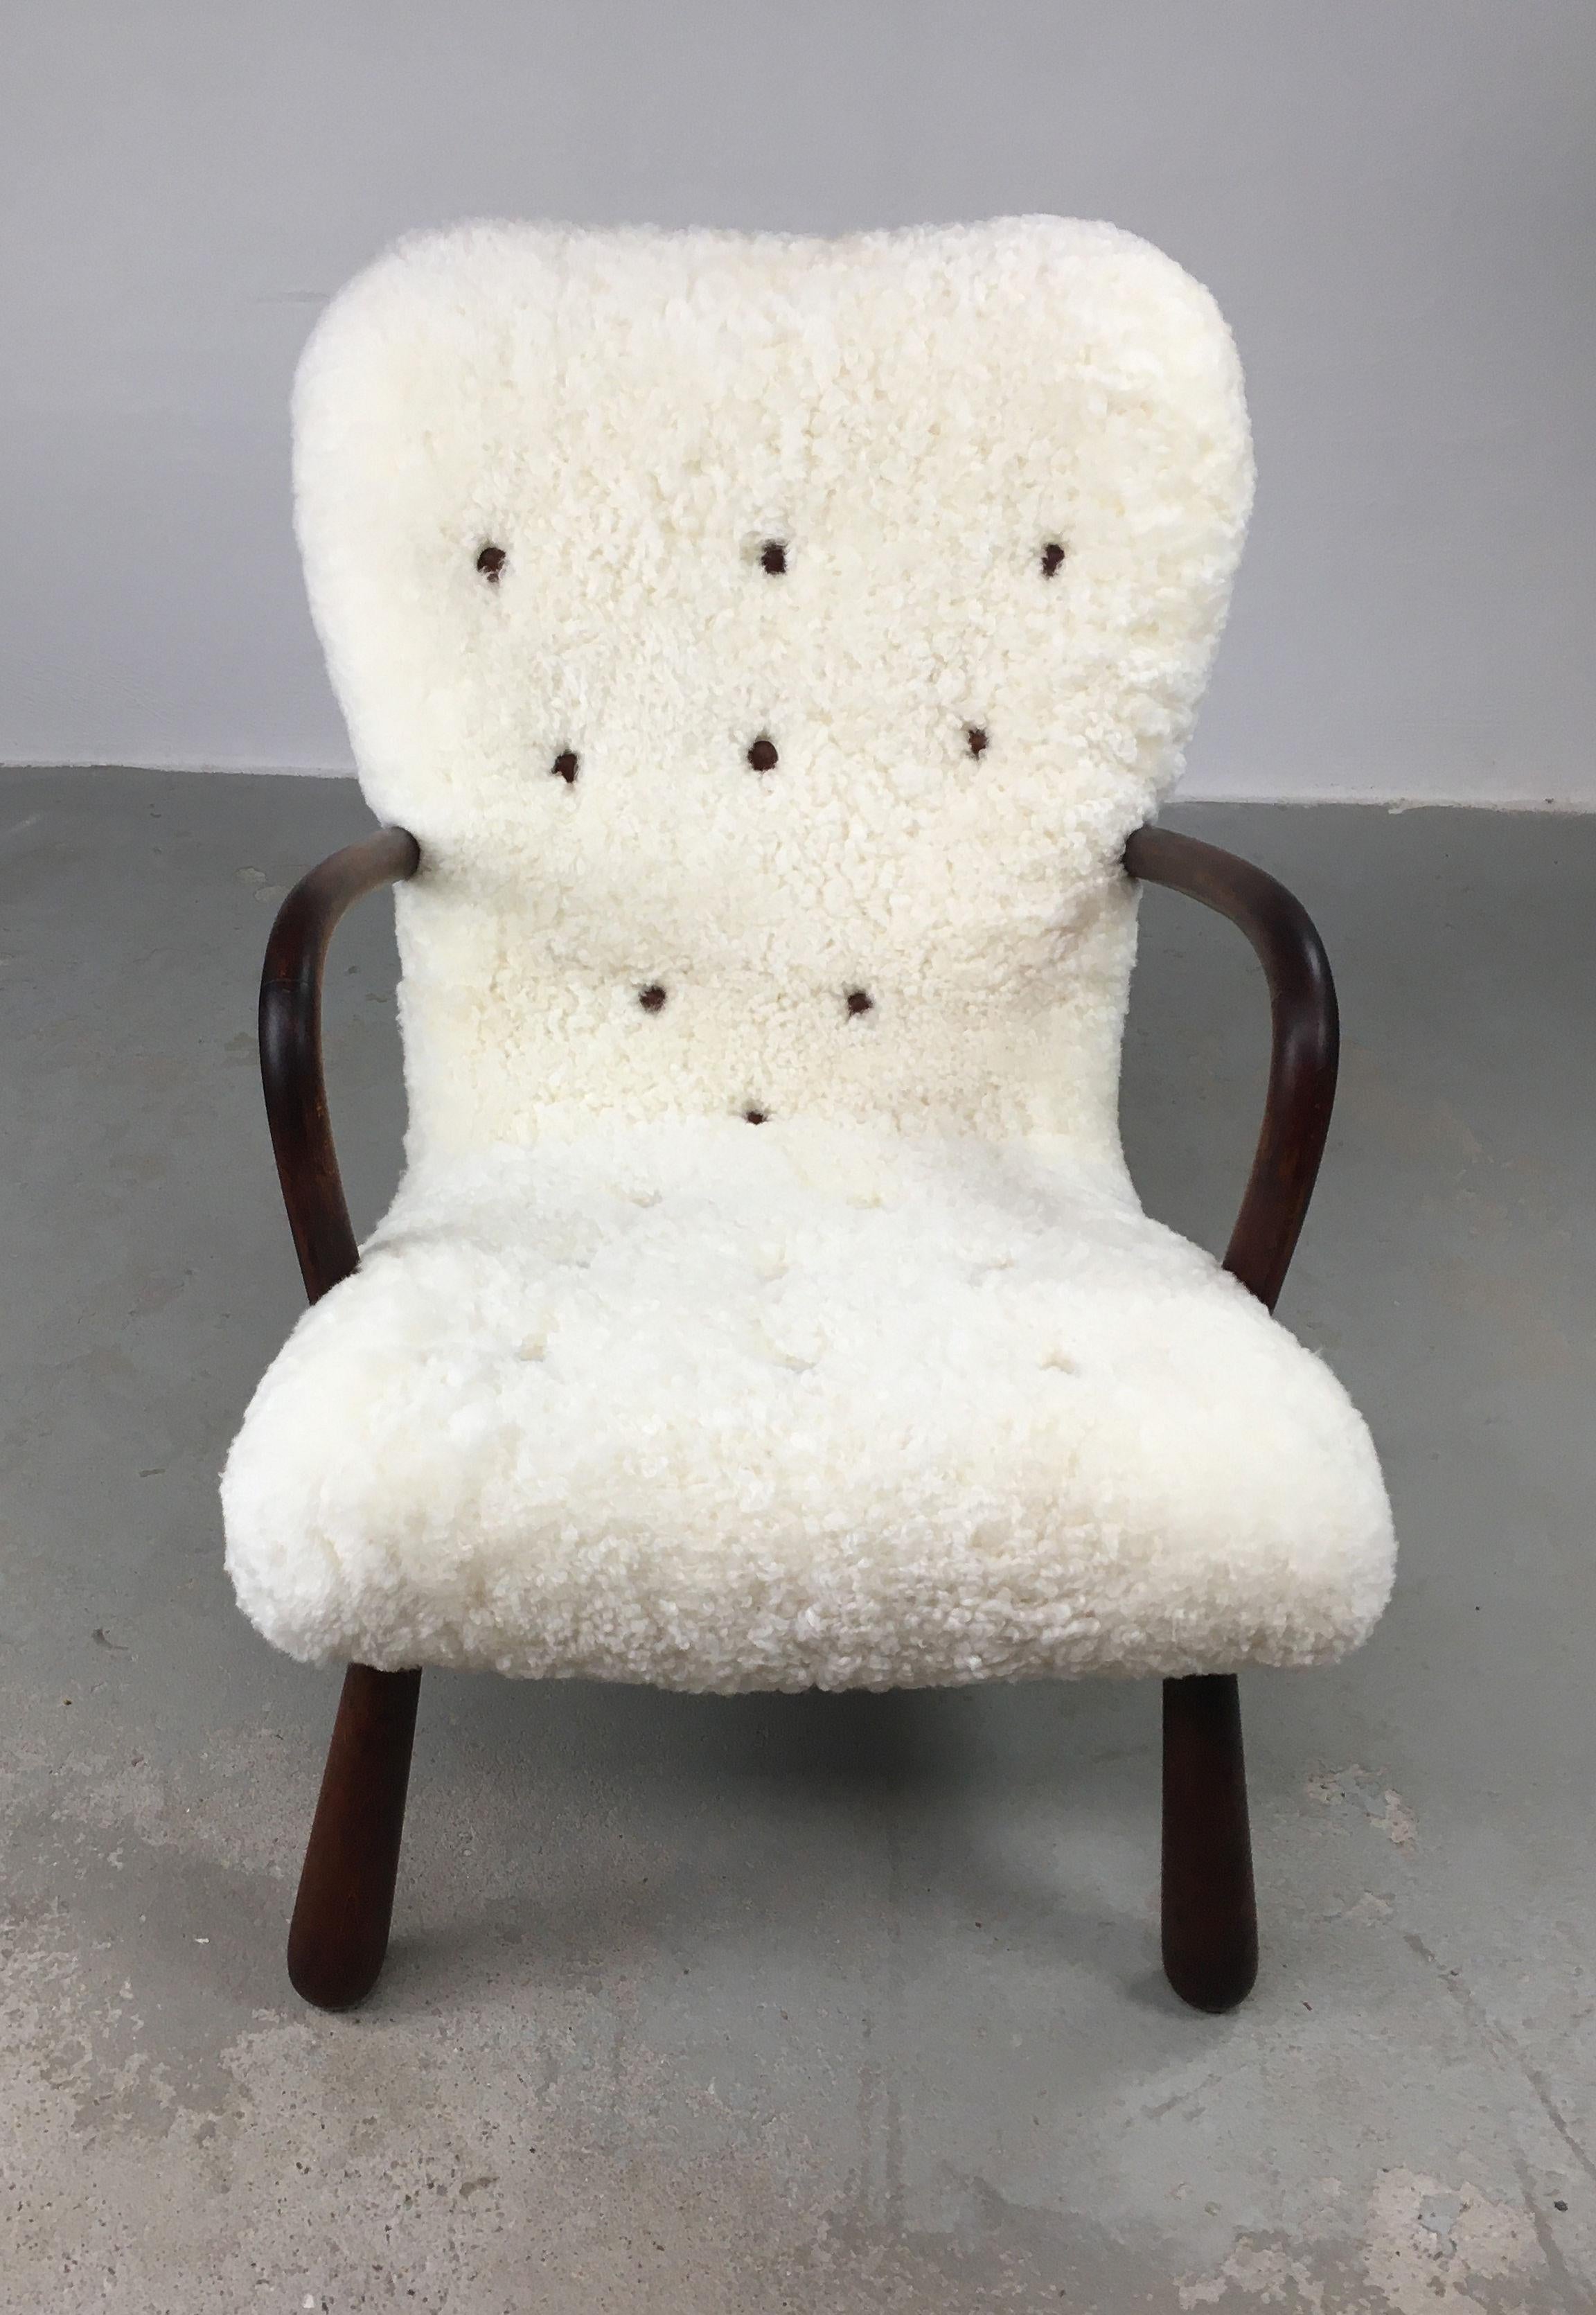 1950's Original fully restored Danish clam chair in sheepskin by Skive Møbelfabrik

The “Clam” chair is by some considered as one of the most attractive chair designs among the Scandinavian mid-century designs and the original design has been